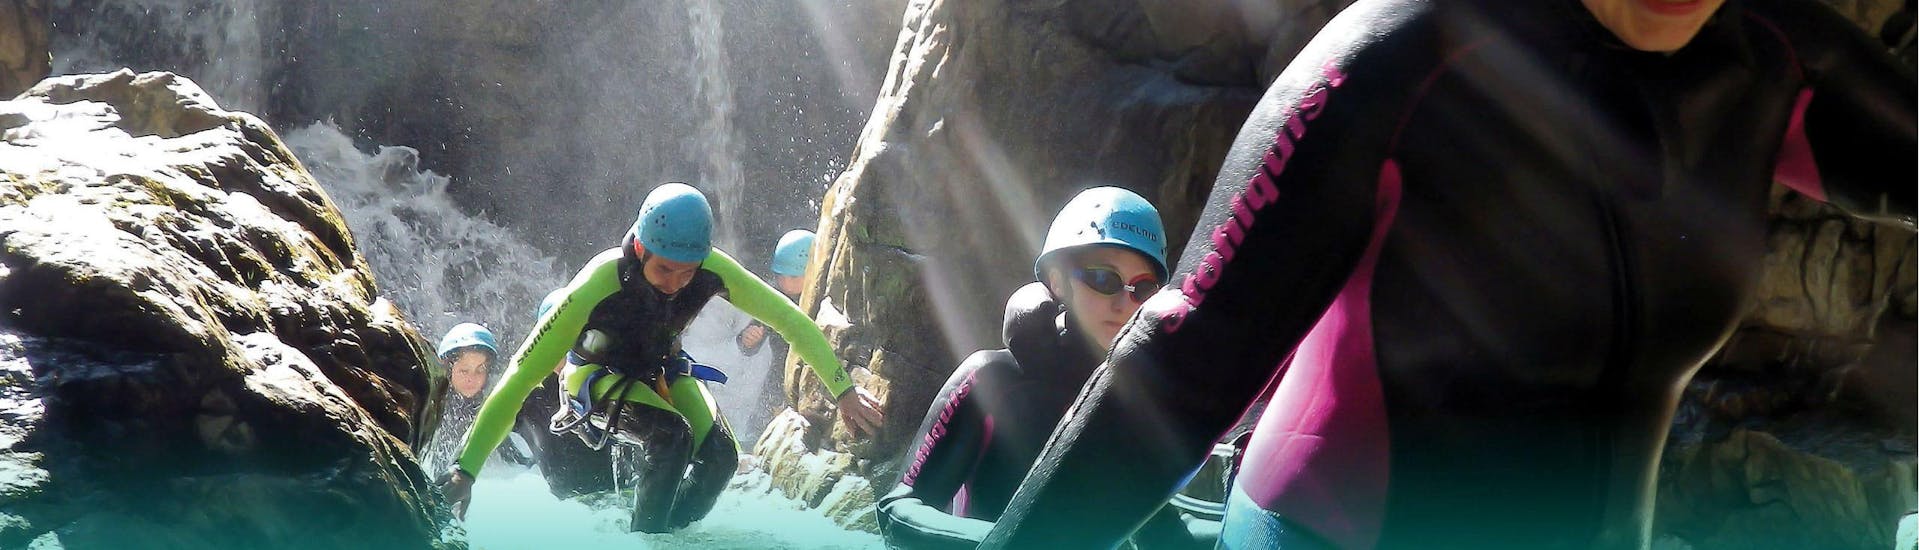 Canyoning di media difficoltà a Ainet.